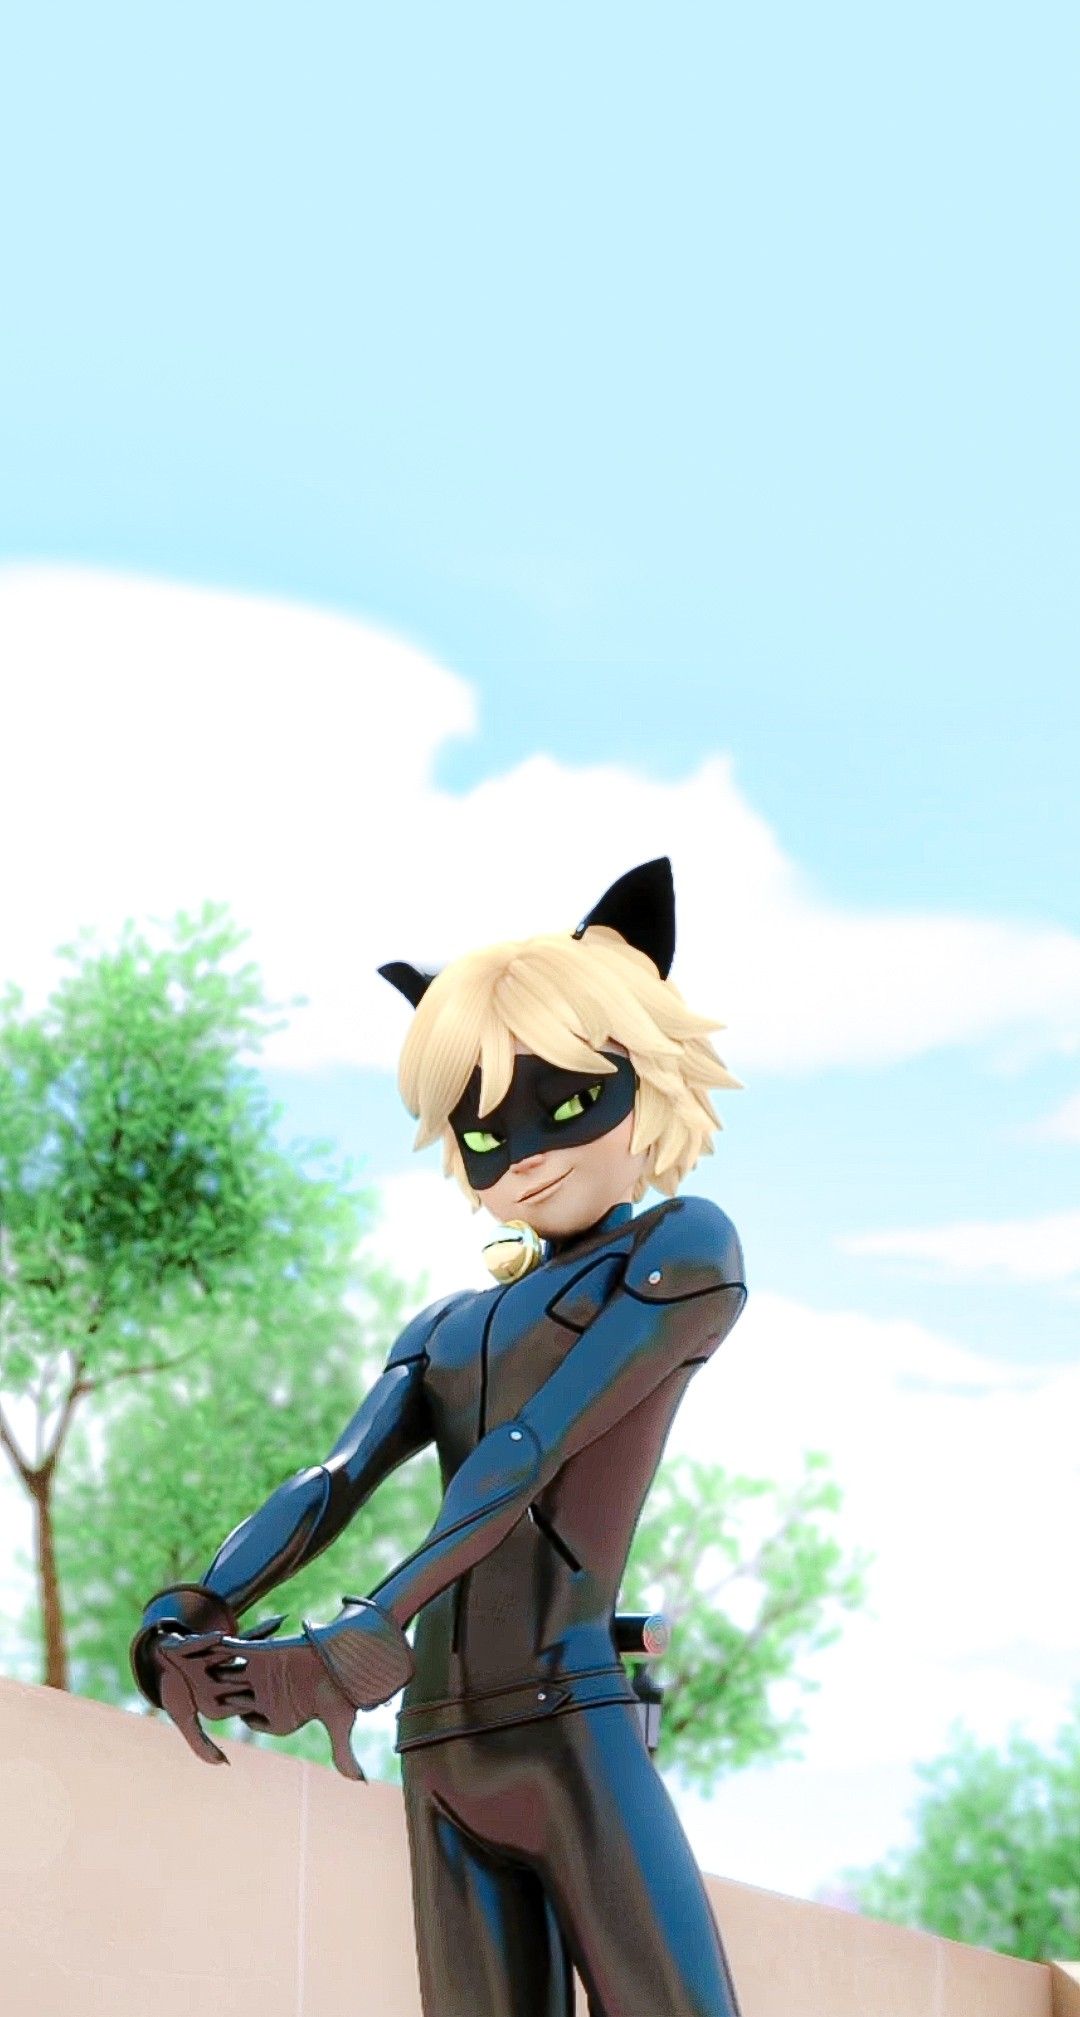 aesthetic chat noir wallpapers wallpaper cave on aesthetic chat noir wallpapers